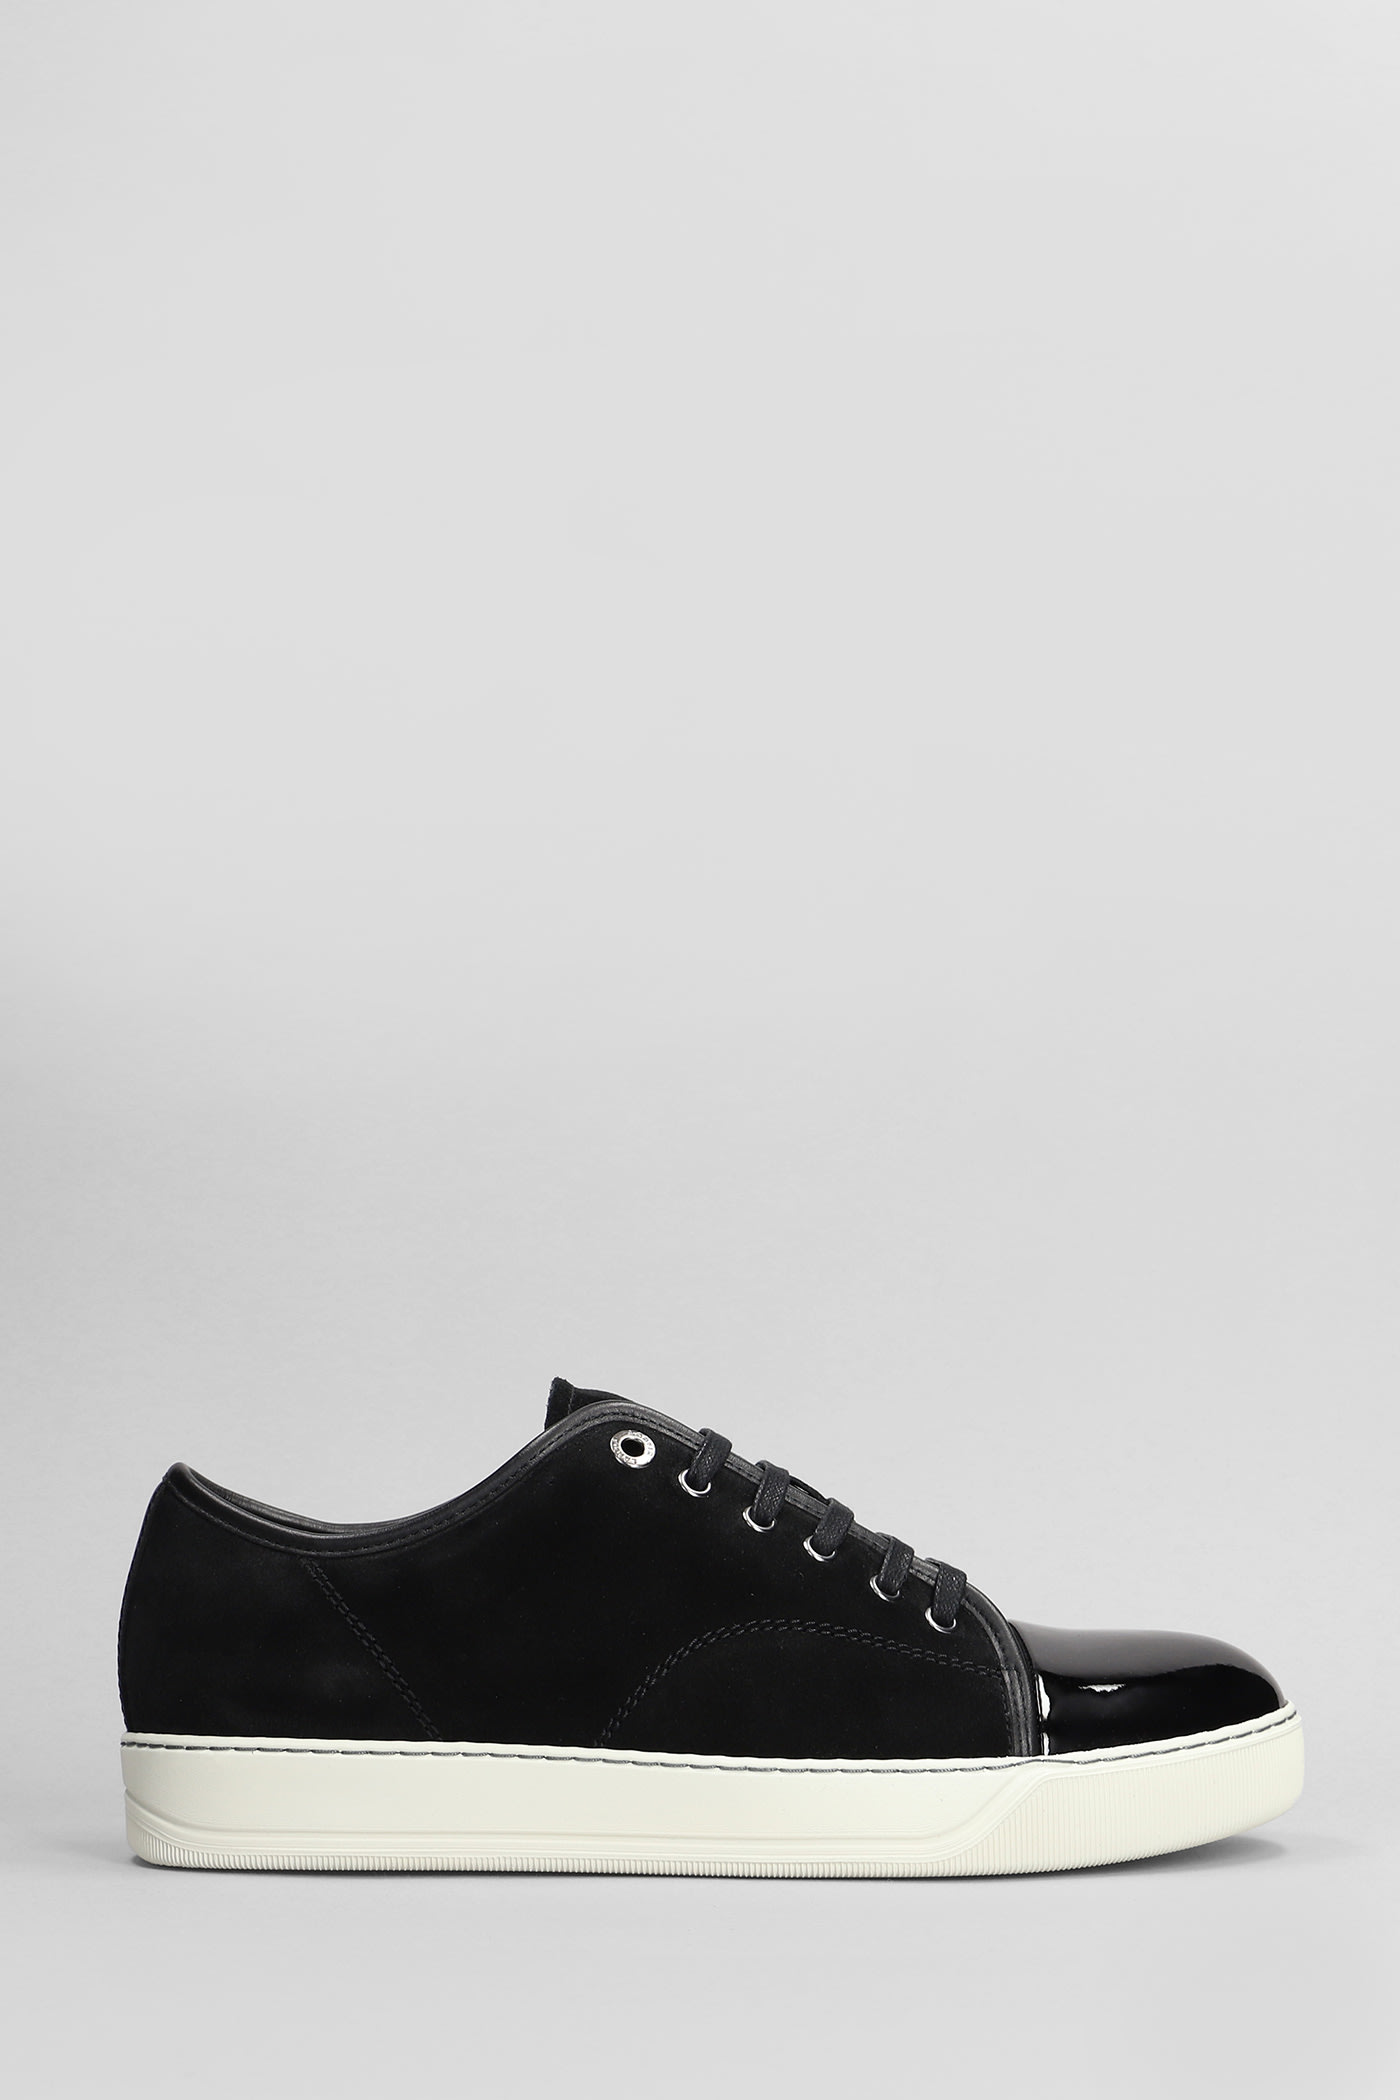 Dbb1 Sneakers In Black Suede And Leather